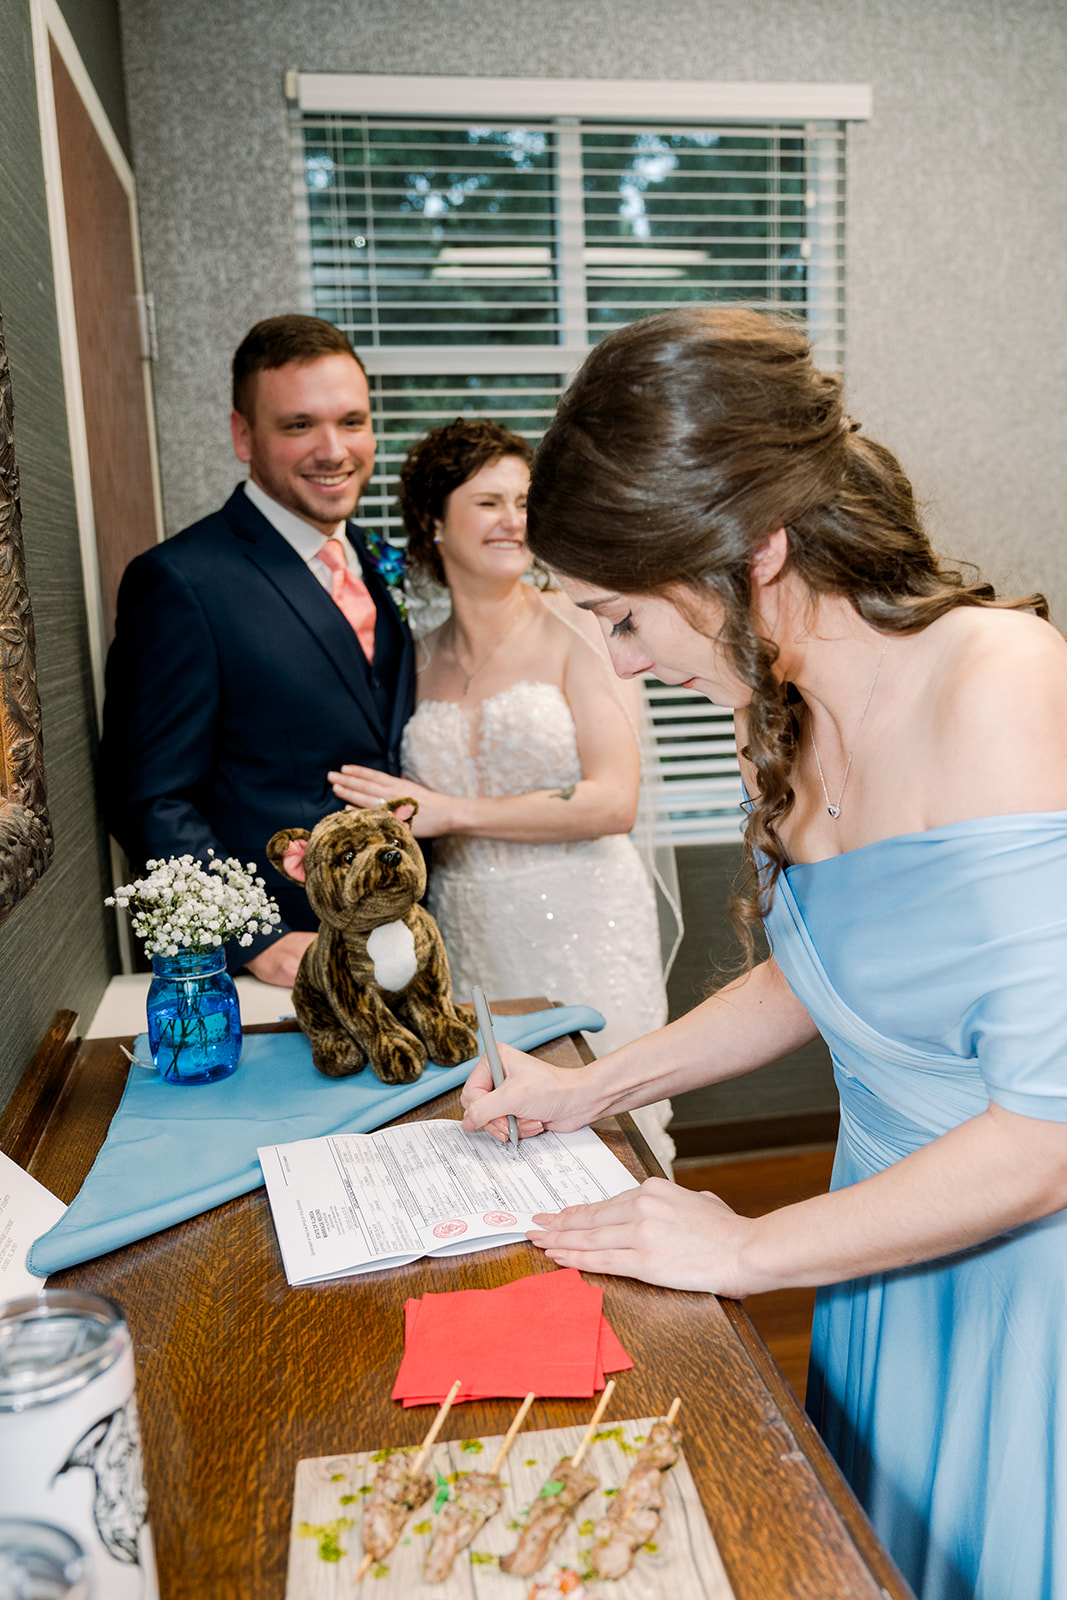 Maid of honor signing marriage license